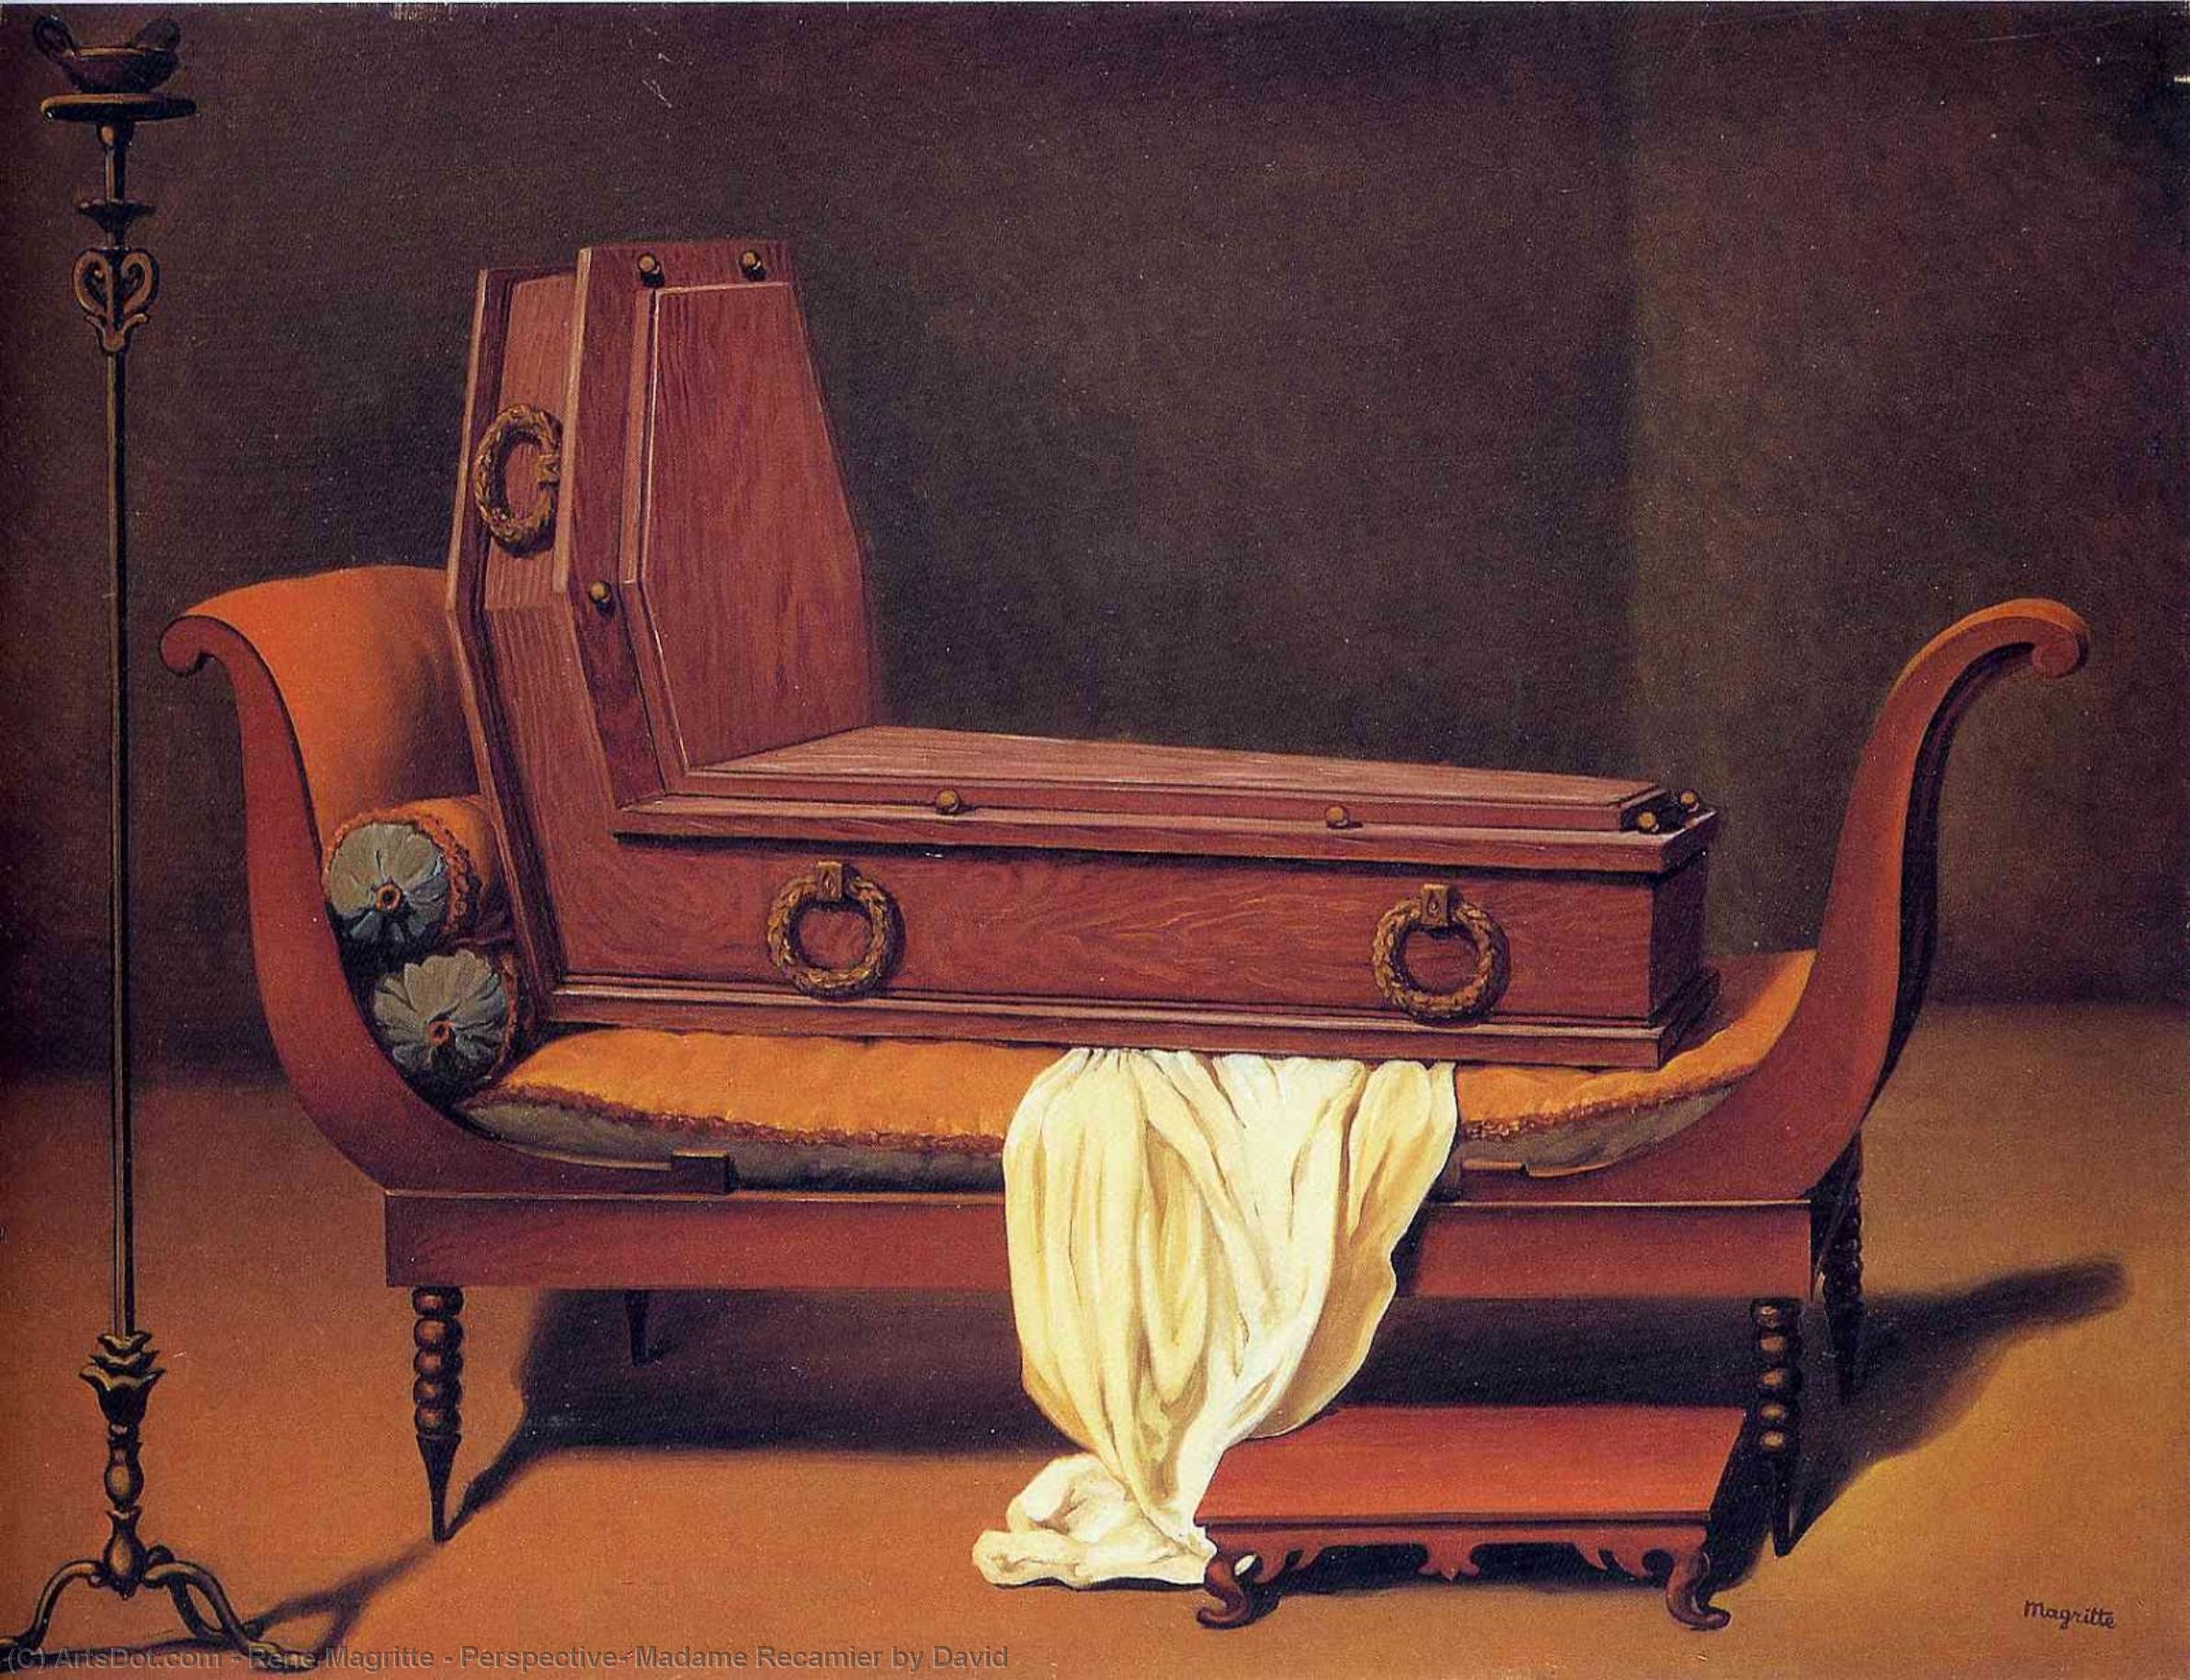 WikiOO.org - 백과 사전 - 회화, 삽화 Rene Magritte - Perspective: Madame Recamier by David